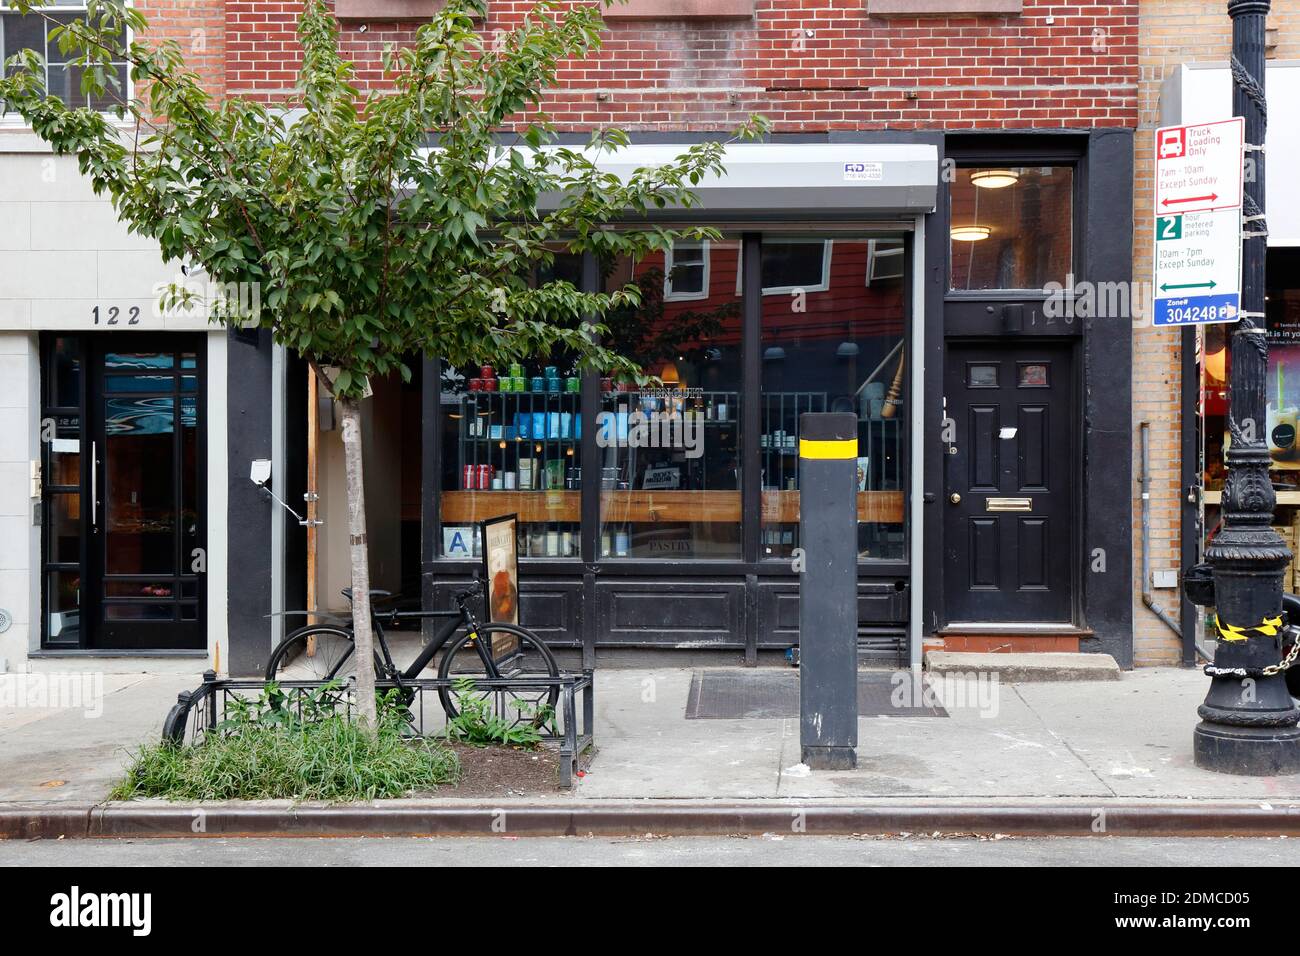 Bien Cuit, 120 Smith St, Brooklyn, New York. NYC storefront photo of a French bakery and cafe in the Cobble Hill neighborhood. Stock Photo